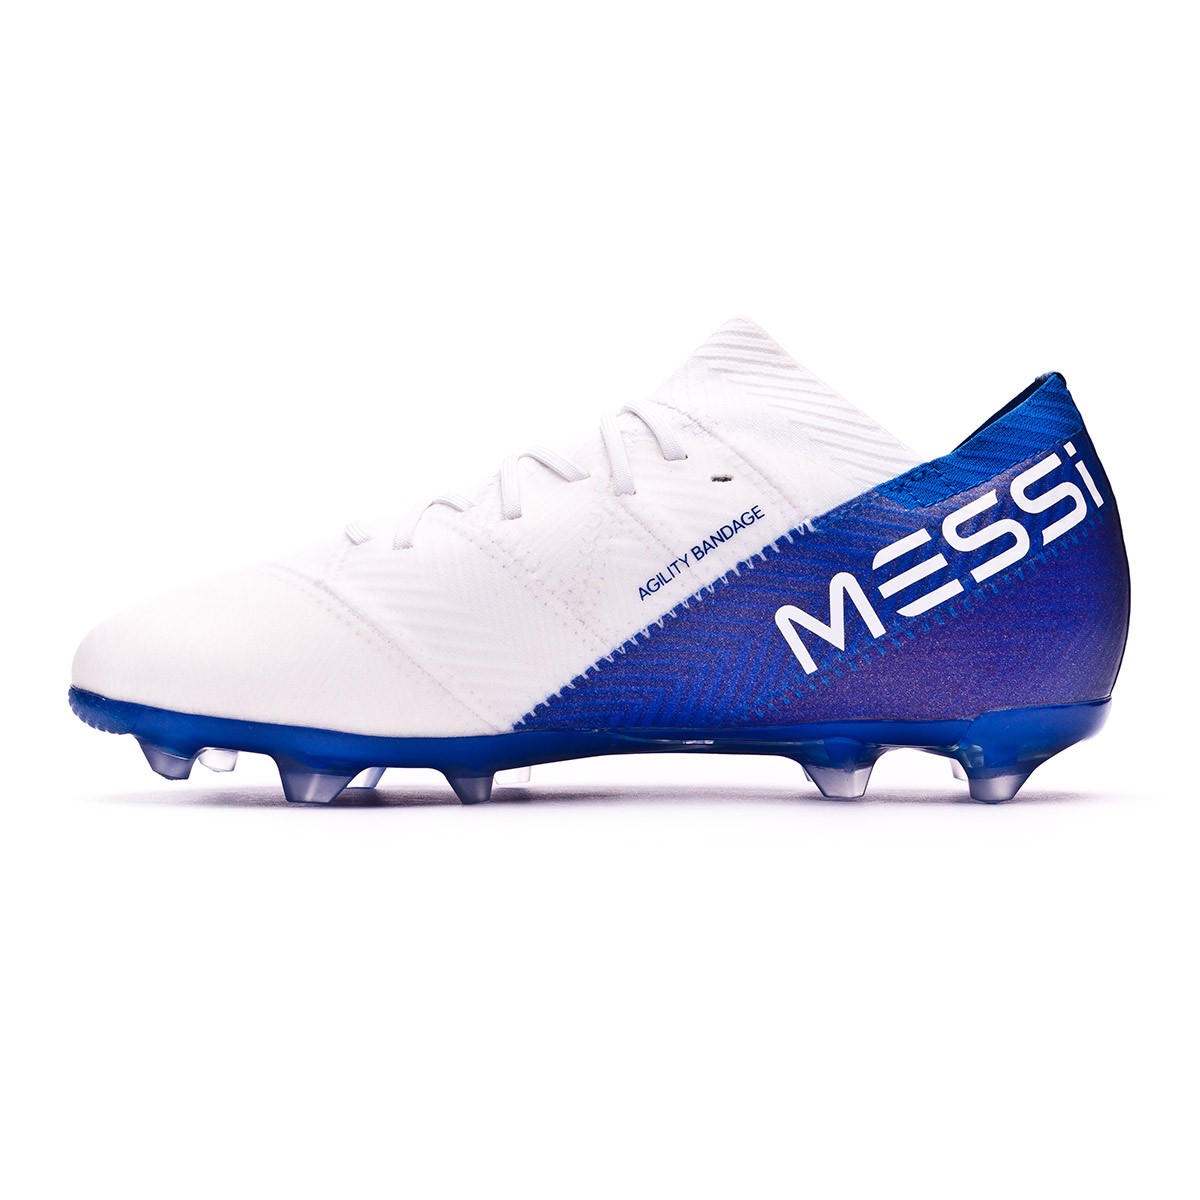 messi blue football boots